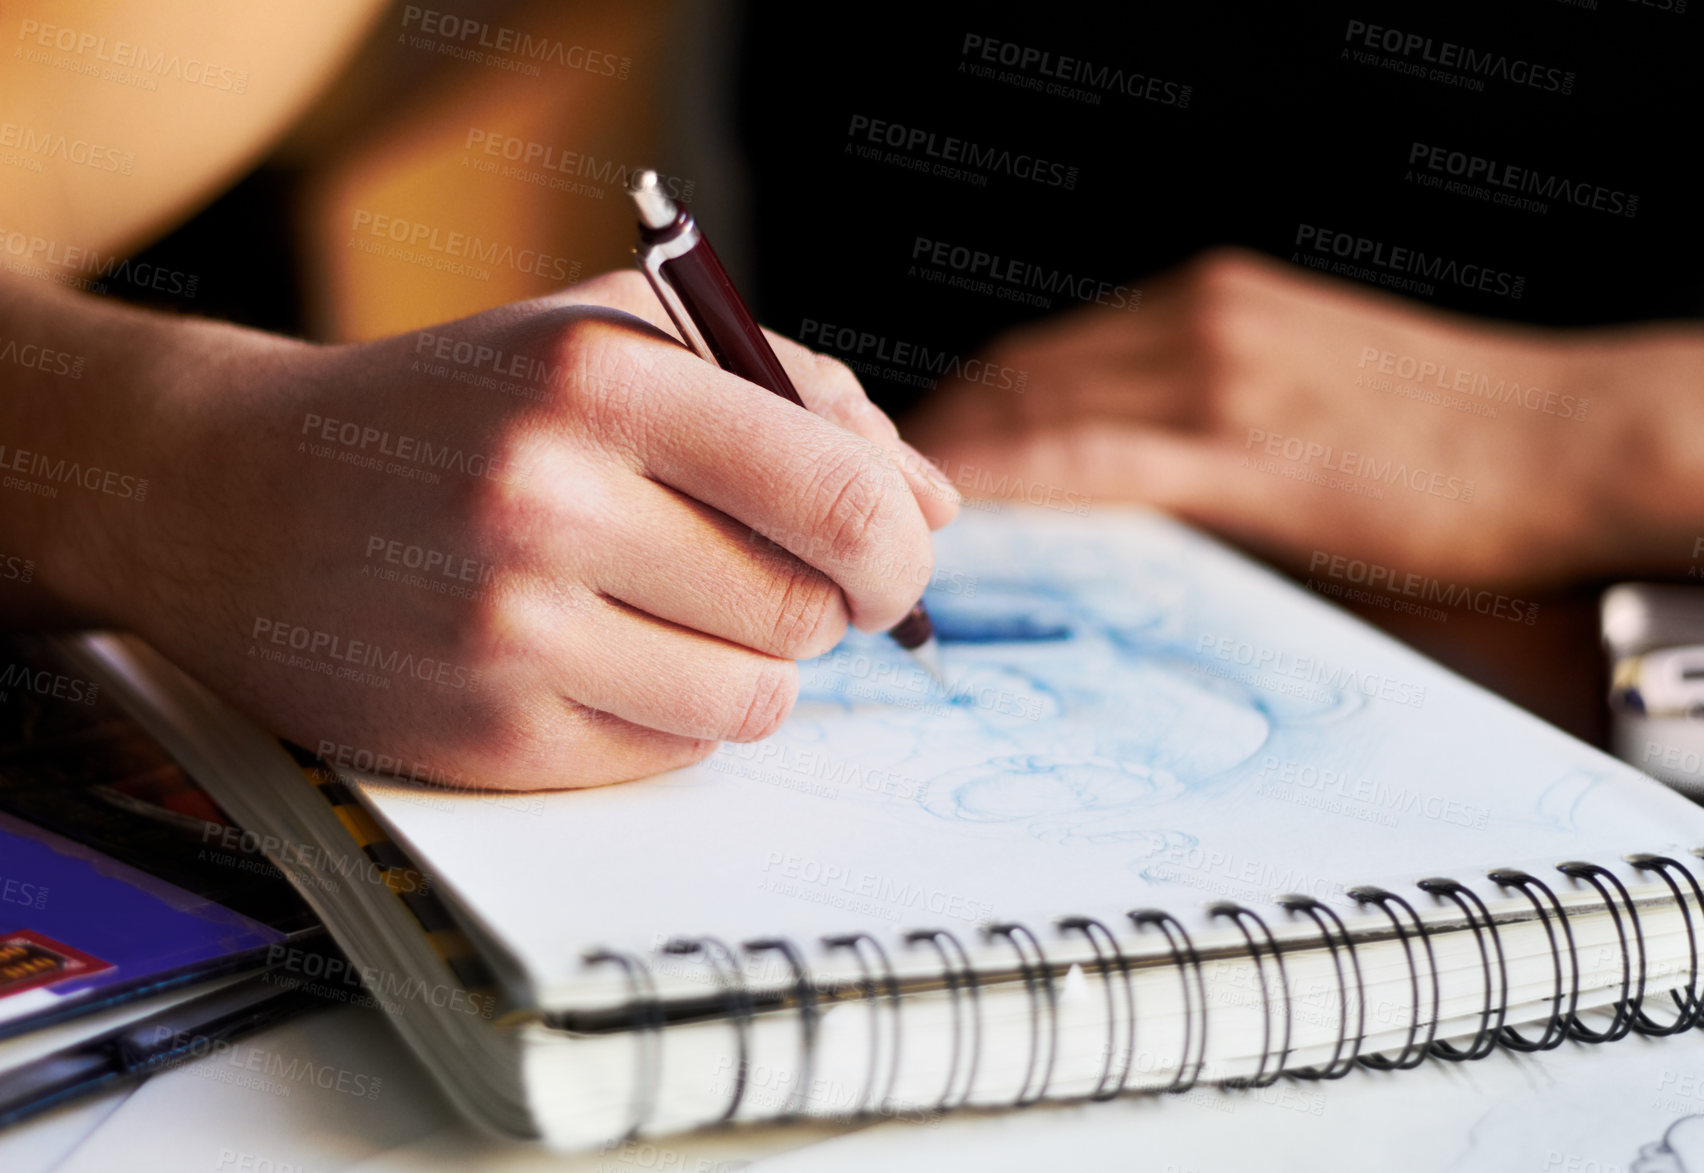 Buy stock photo Hands, notebook or person drawing picture, creative sketch or fantasy cartoon design on paper. Creativity, closeup graphic art or designer artist working on comic, tattoo project or animation process